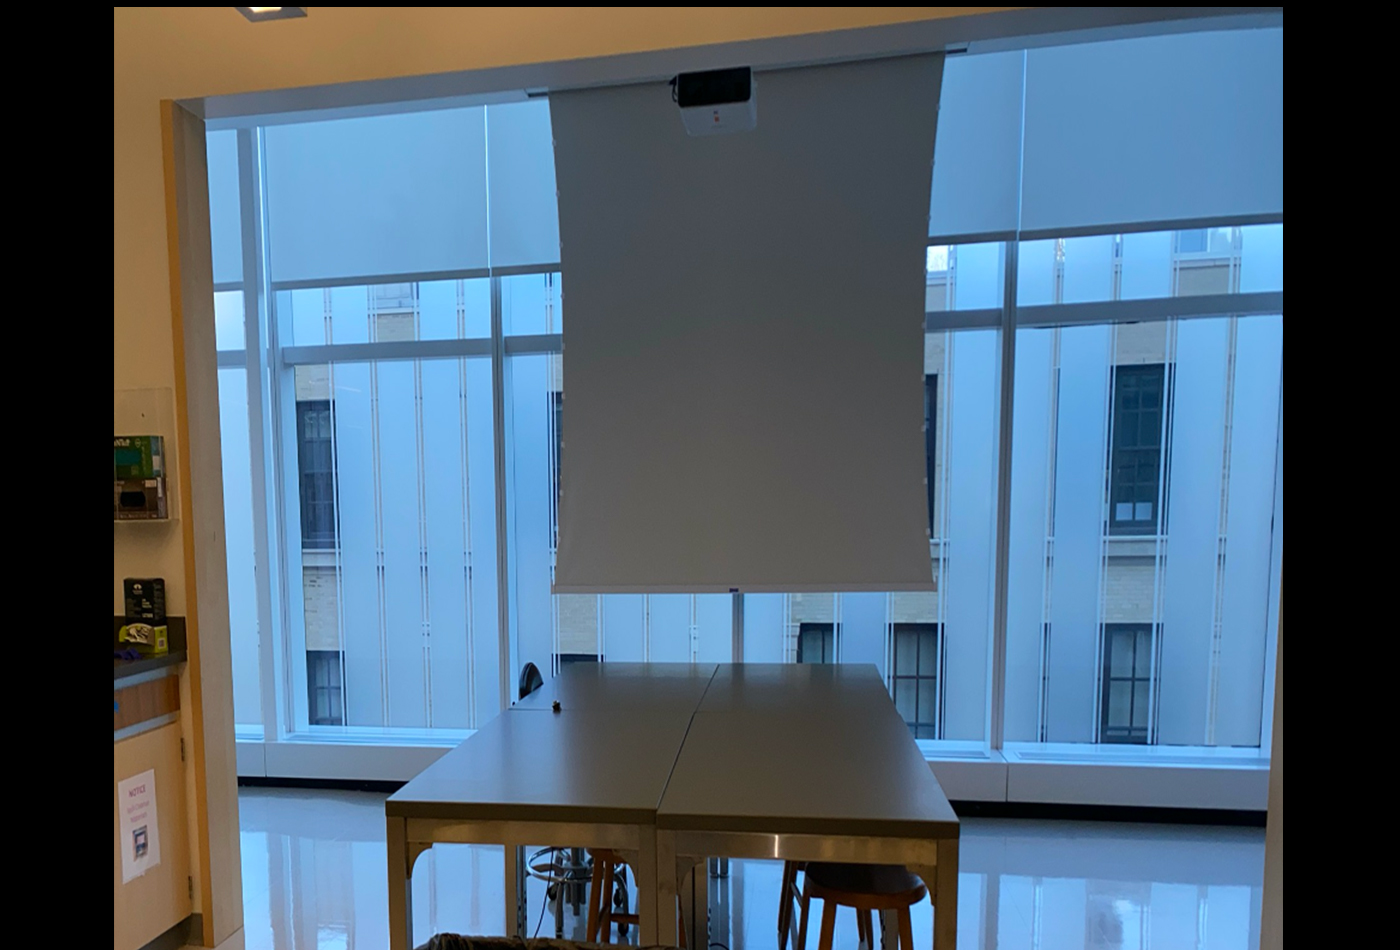 A screen dropped down in front of a window.